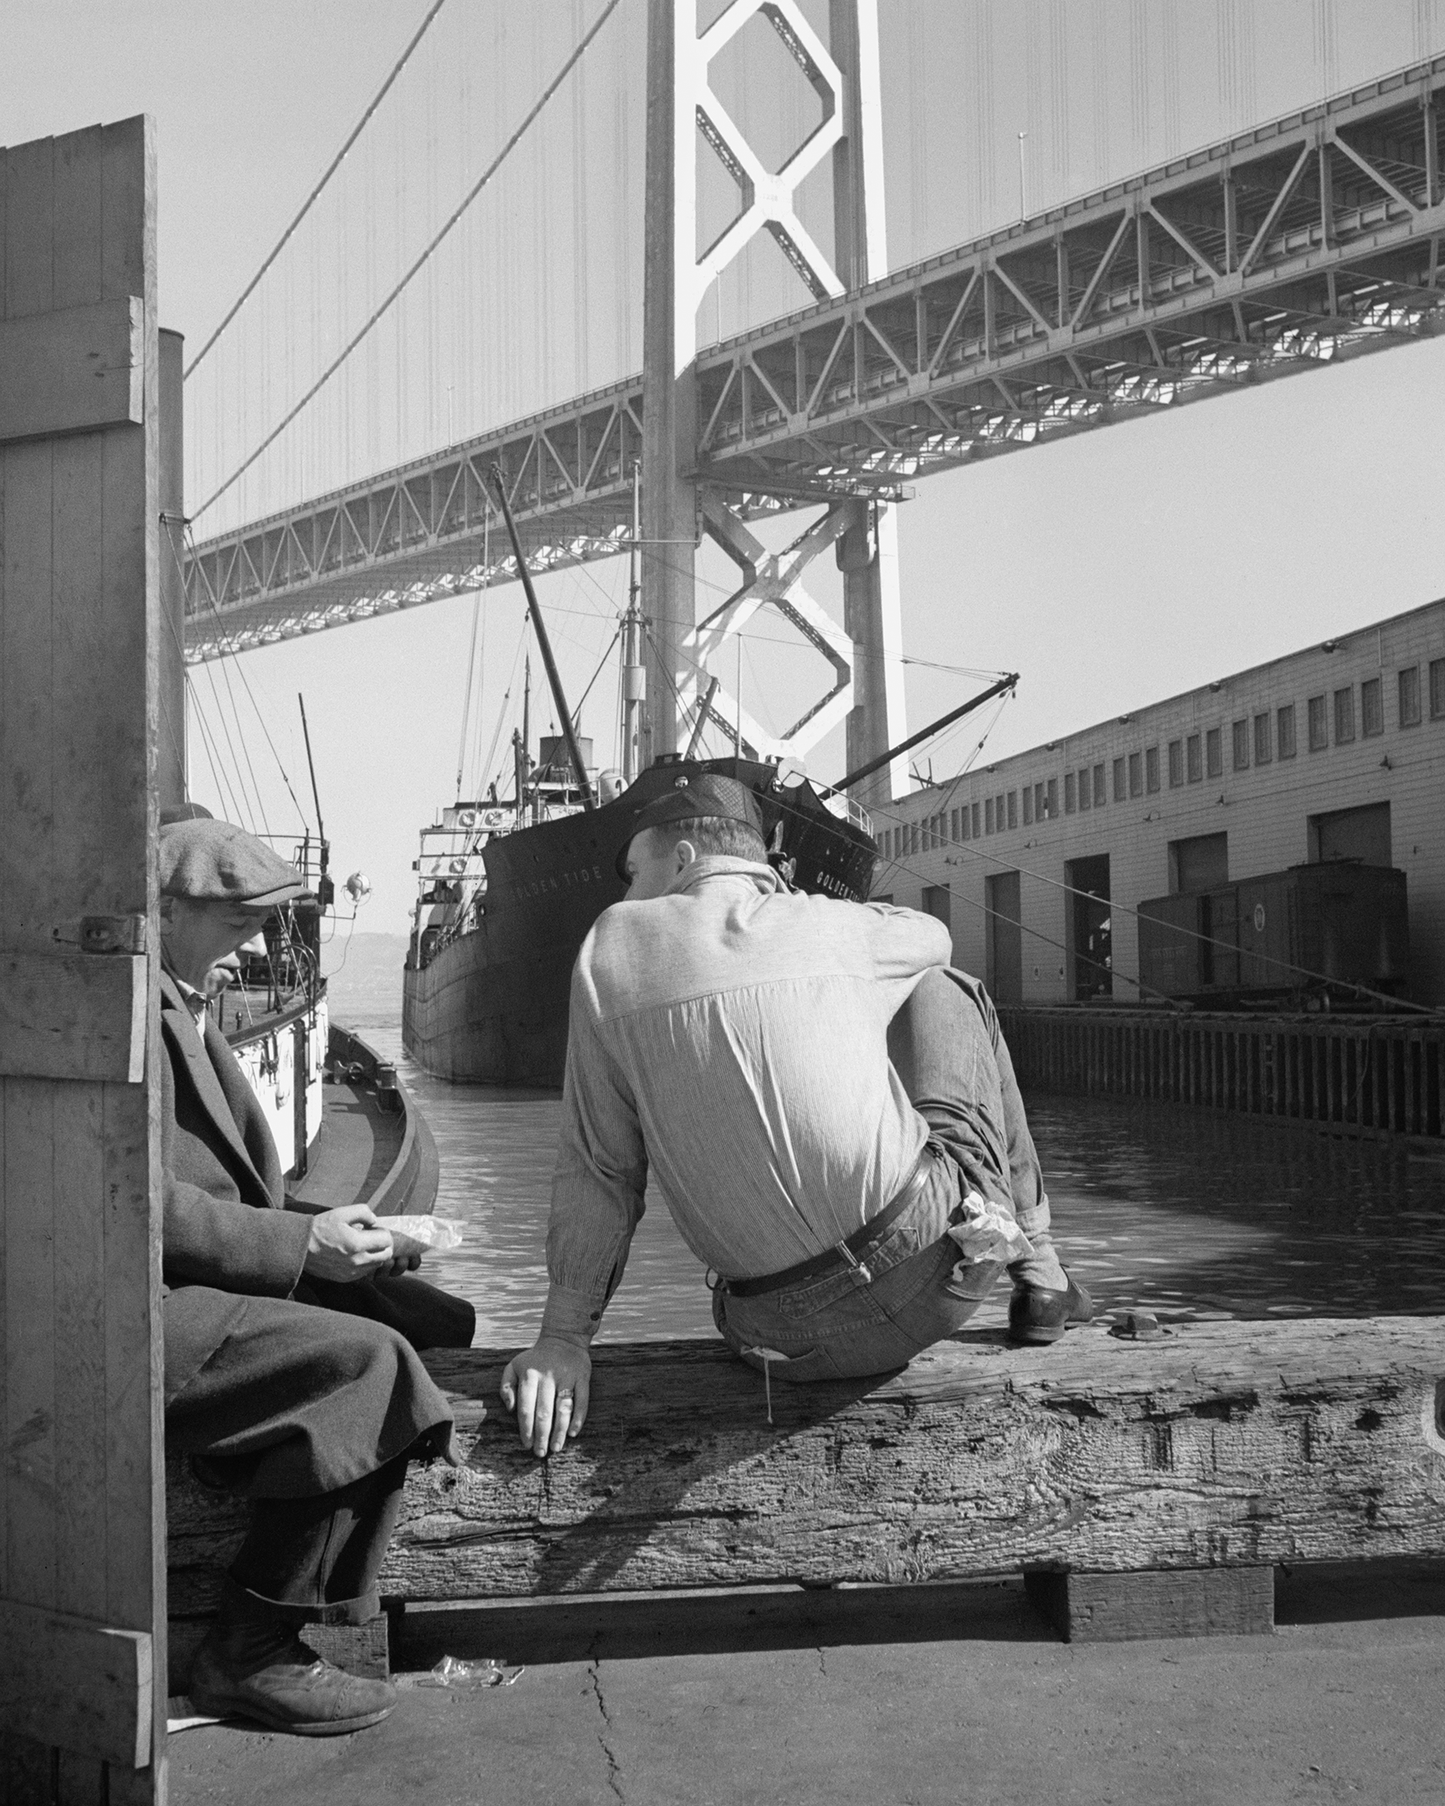 Longshoremen's Lunch Hour on the Waterfront, February 1937.